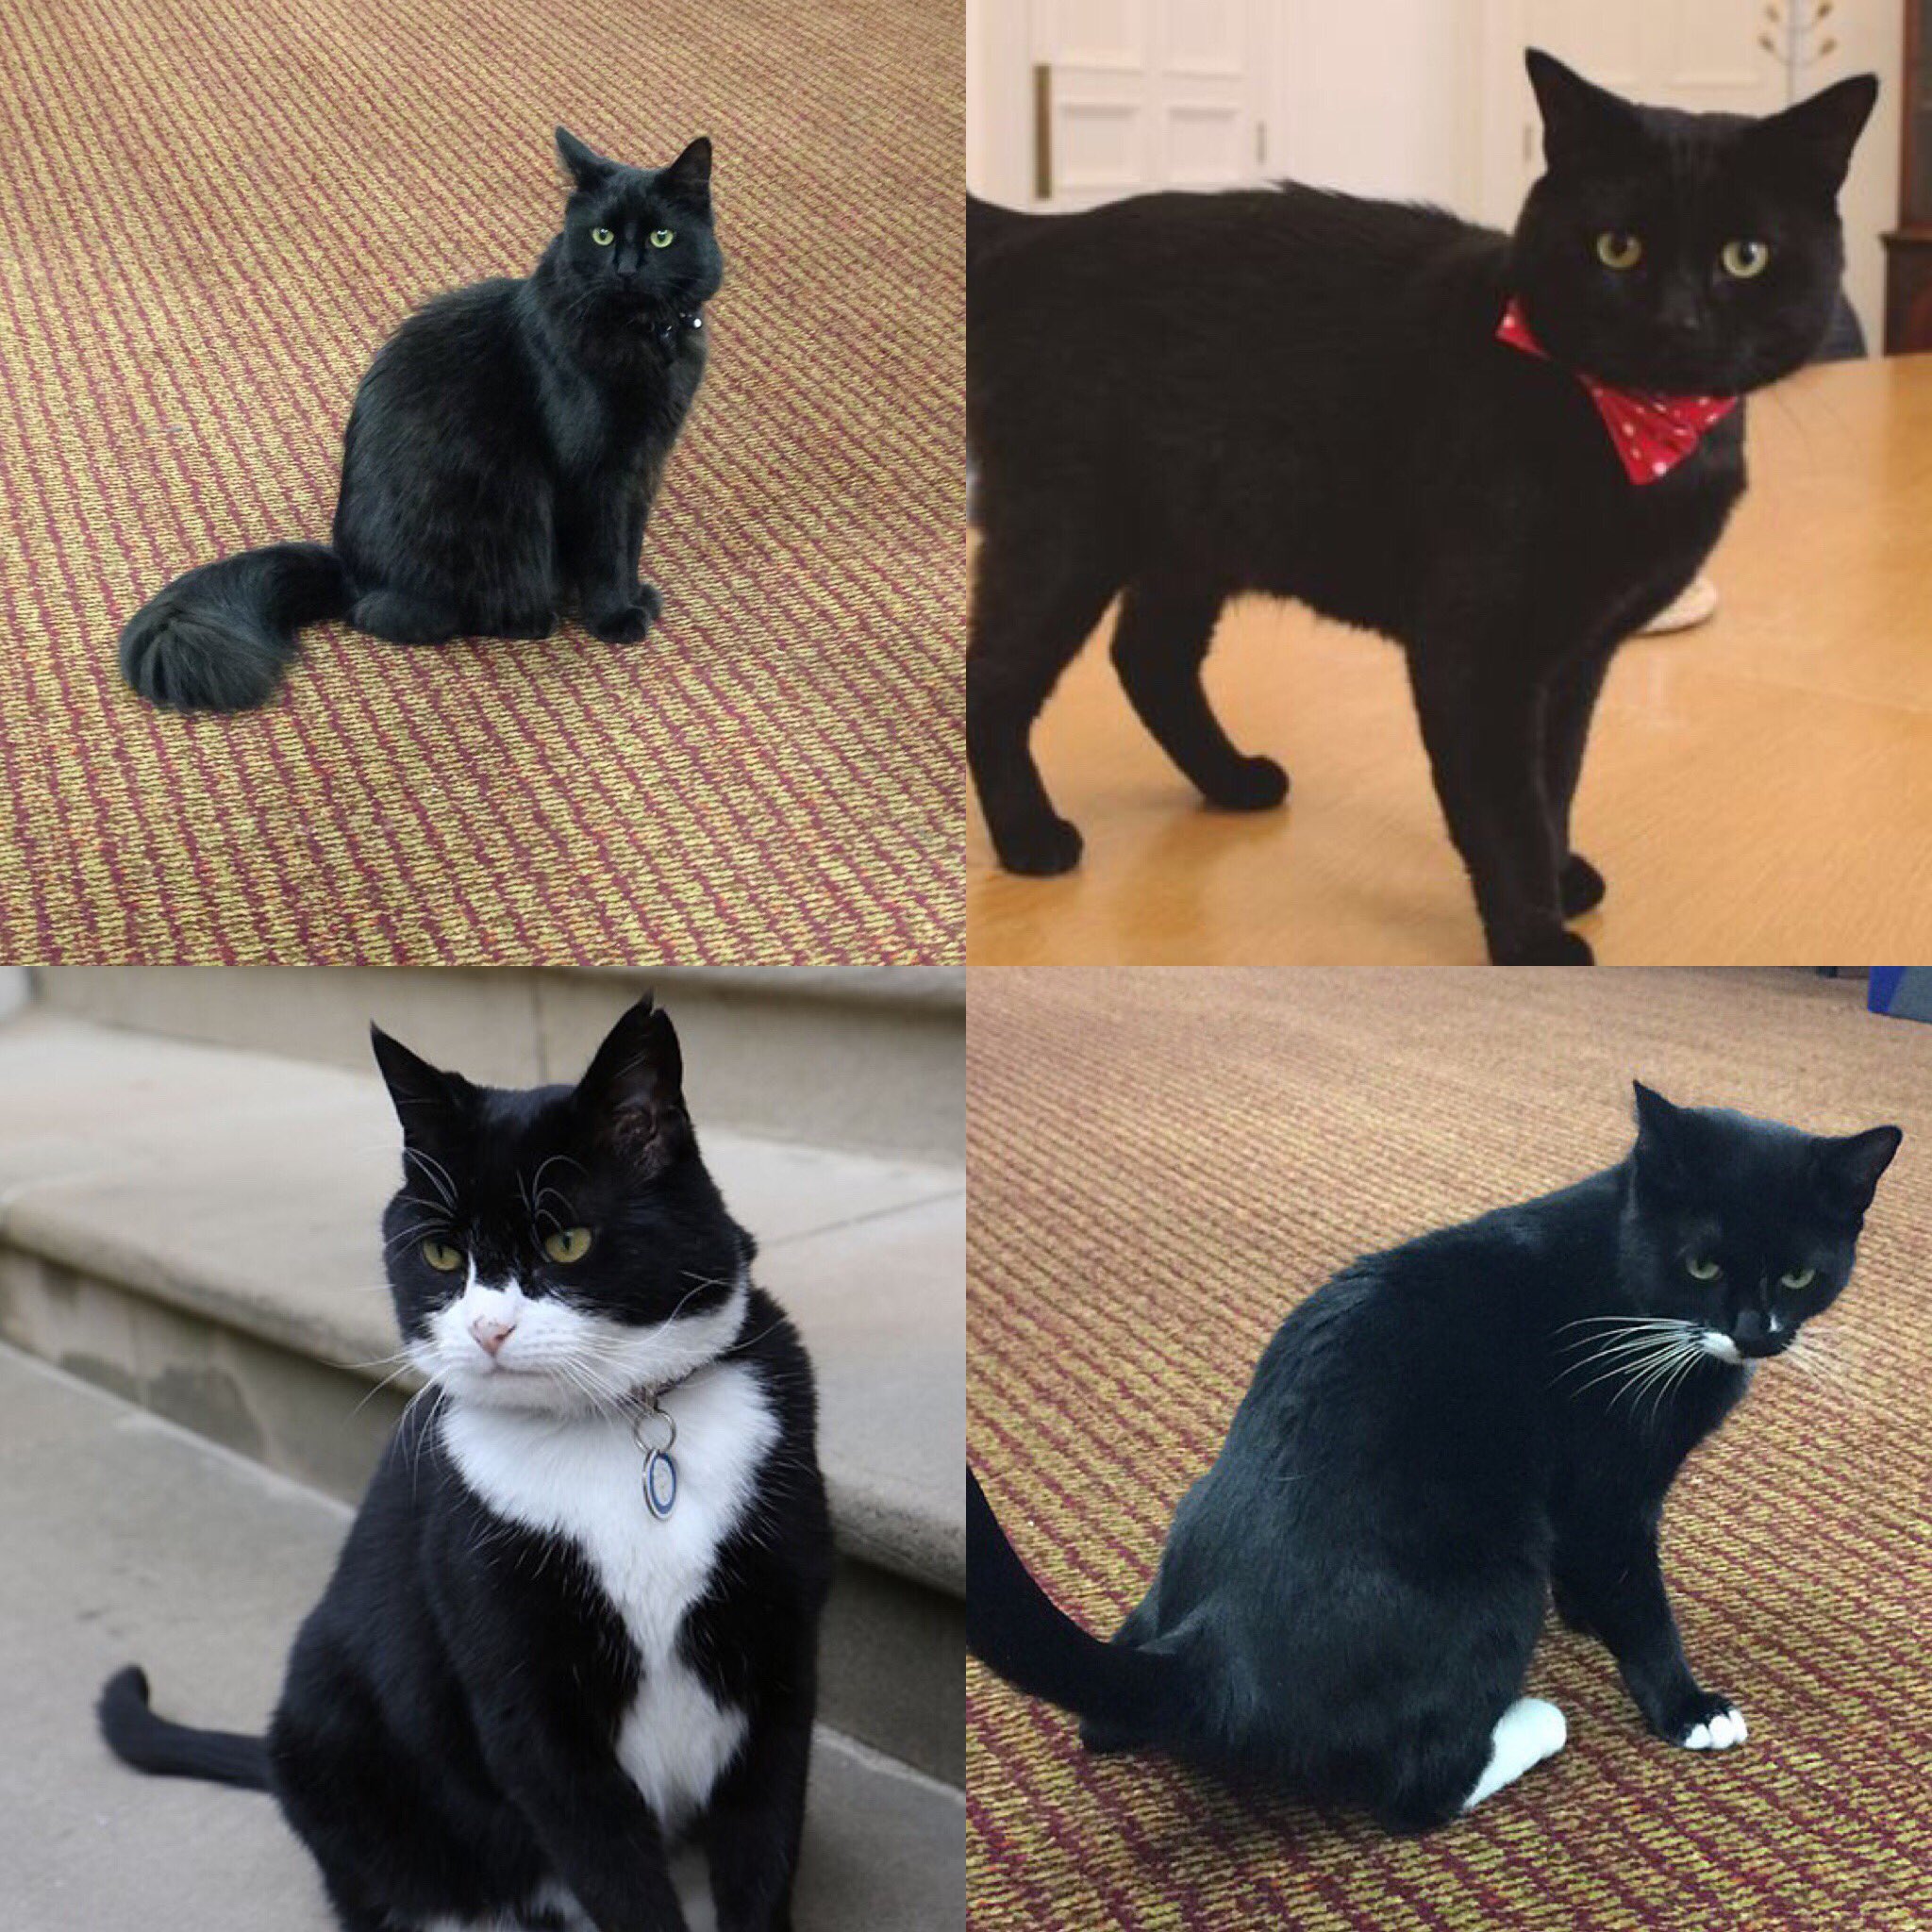 Palmerston the Cat on Twitter: "Black cats are the least likely to be